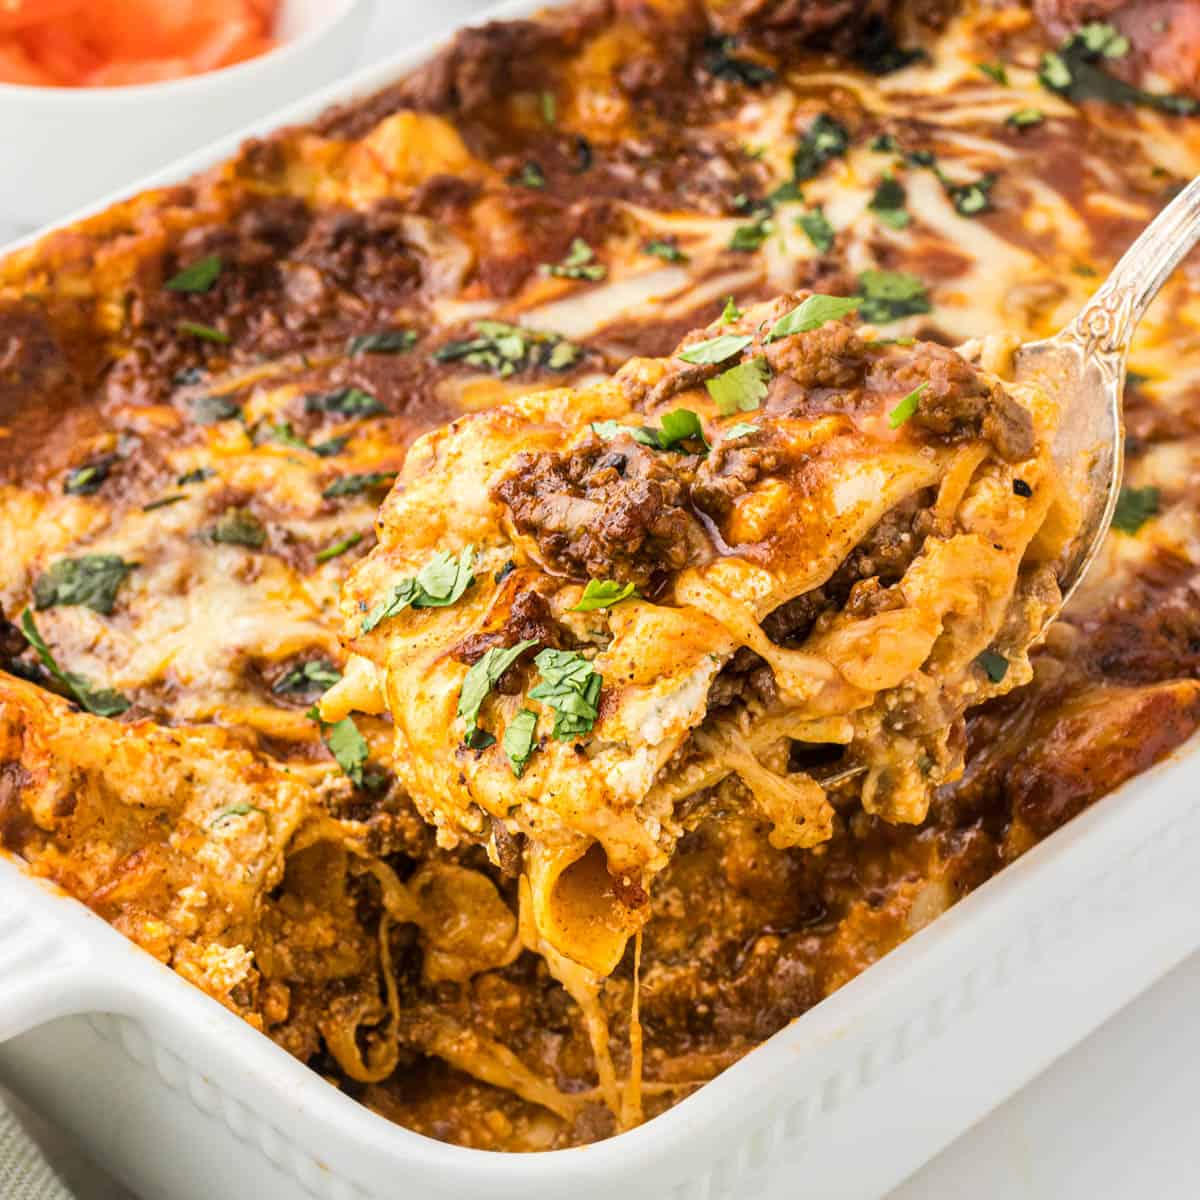 A casserole dish filled with Taco Lasagna, with a spatula dishing out a serving.